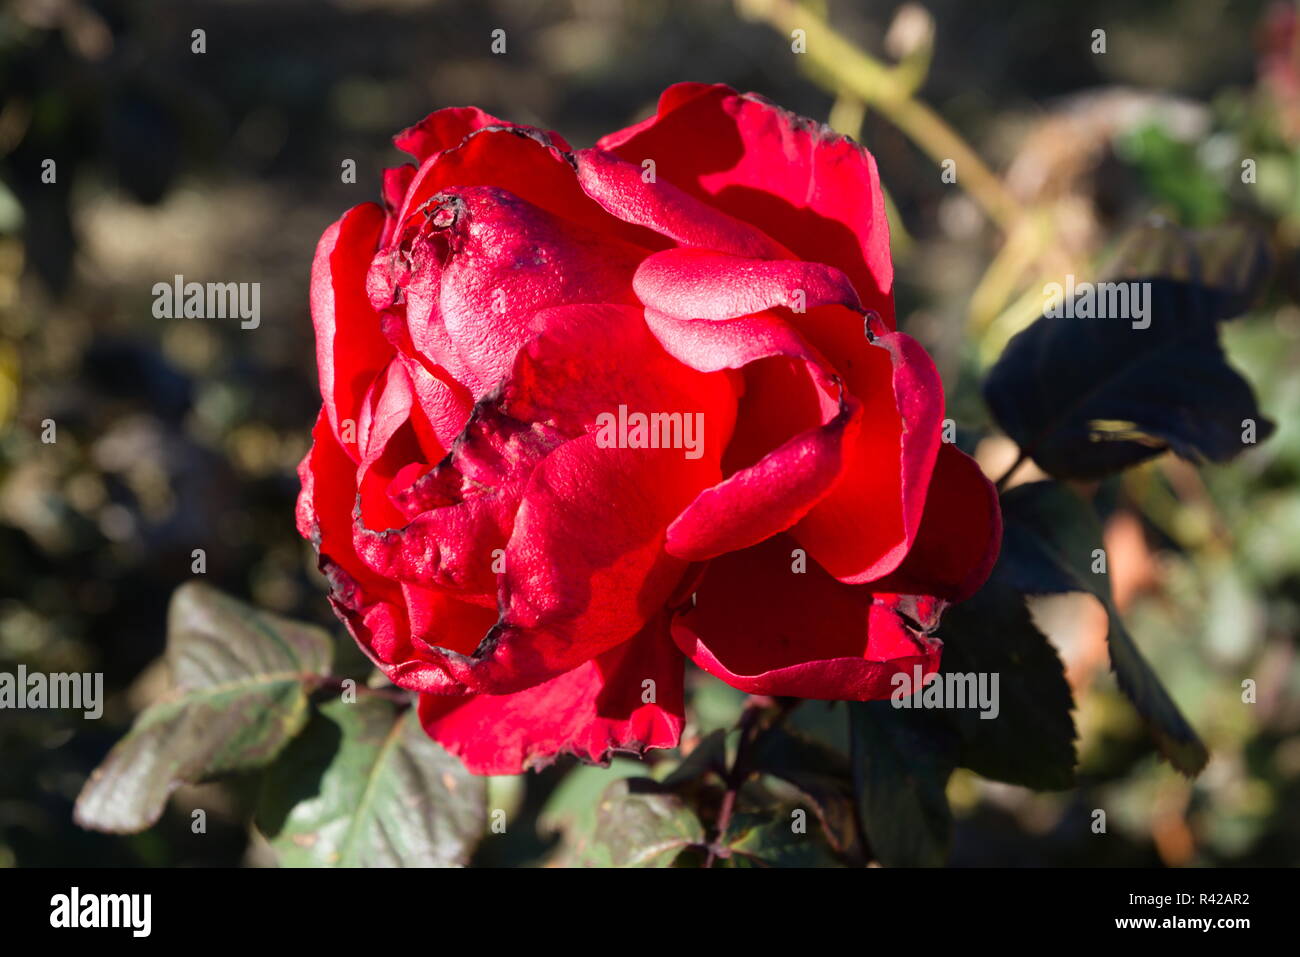 A bright red rose in the sun. Stock Photo